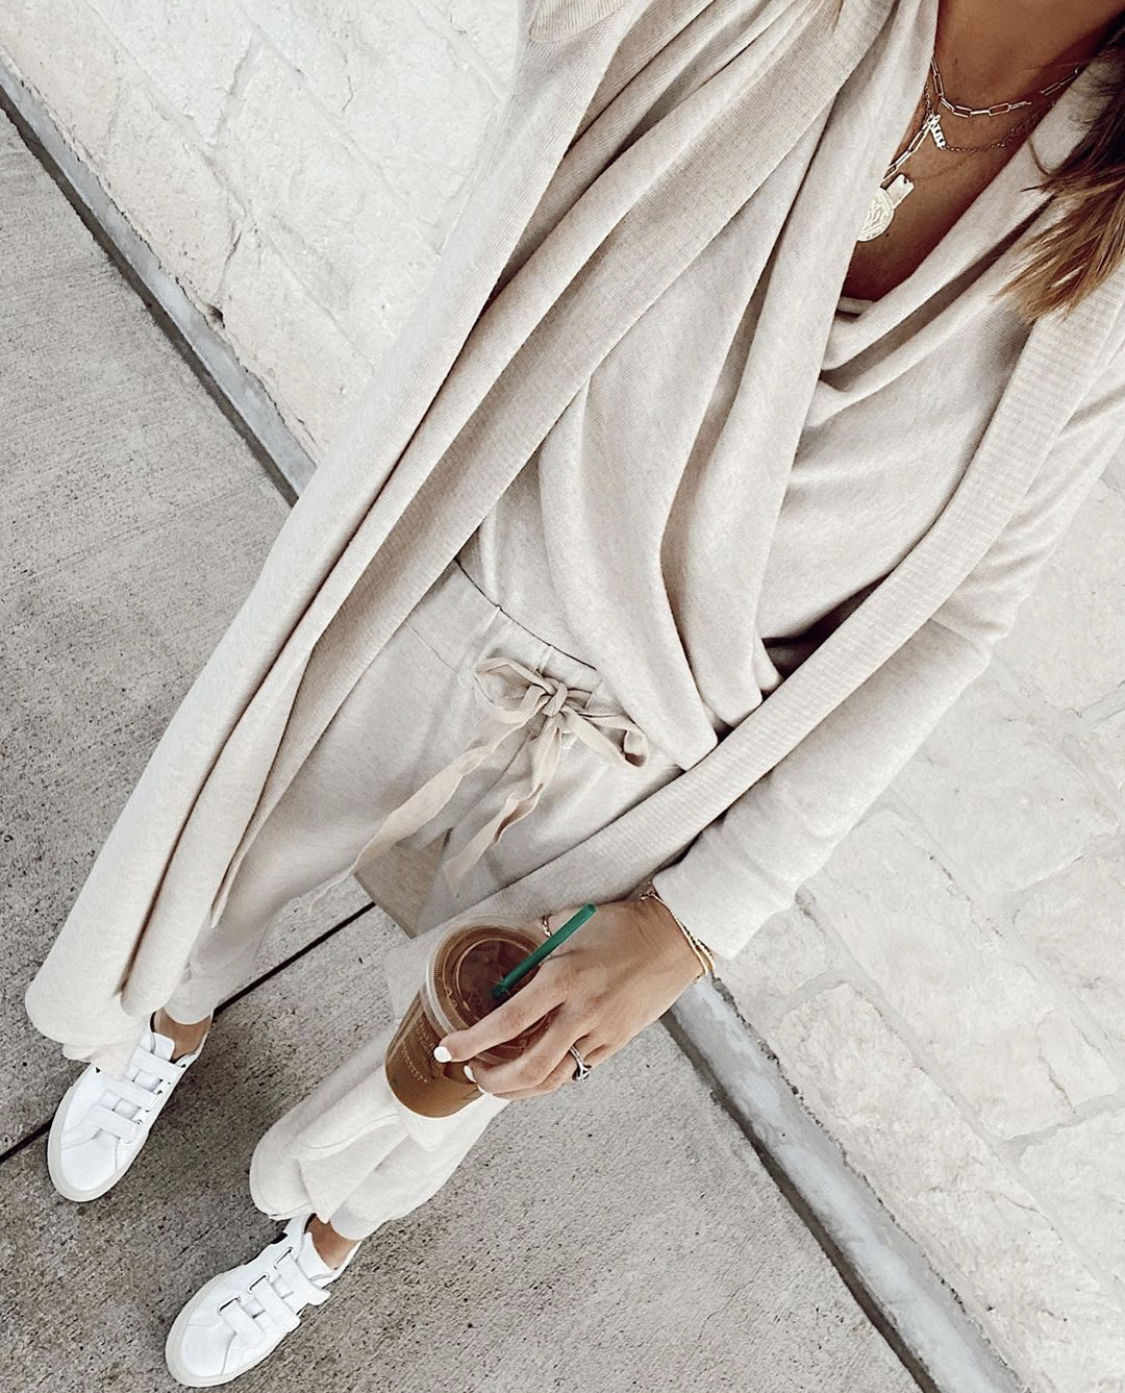 wearing loungewear in public - 1.state x Jaime Shrayber collection - beige cozy knit joggers cozy wrap front top and drape front maxi cardigan